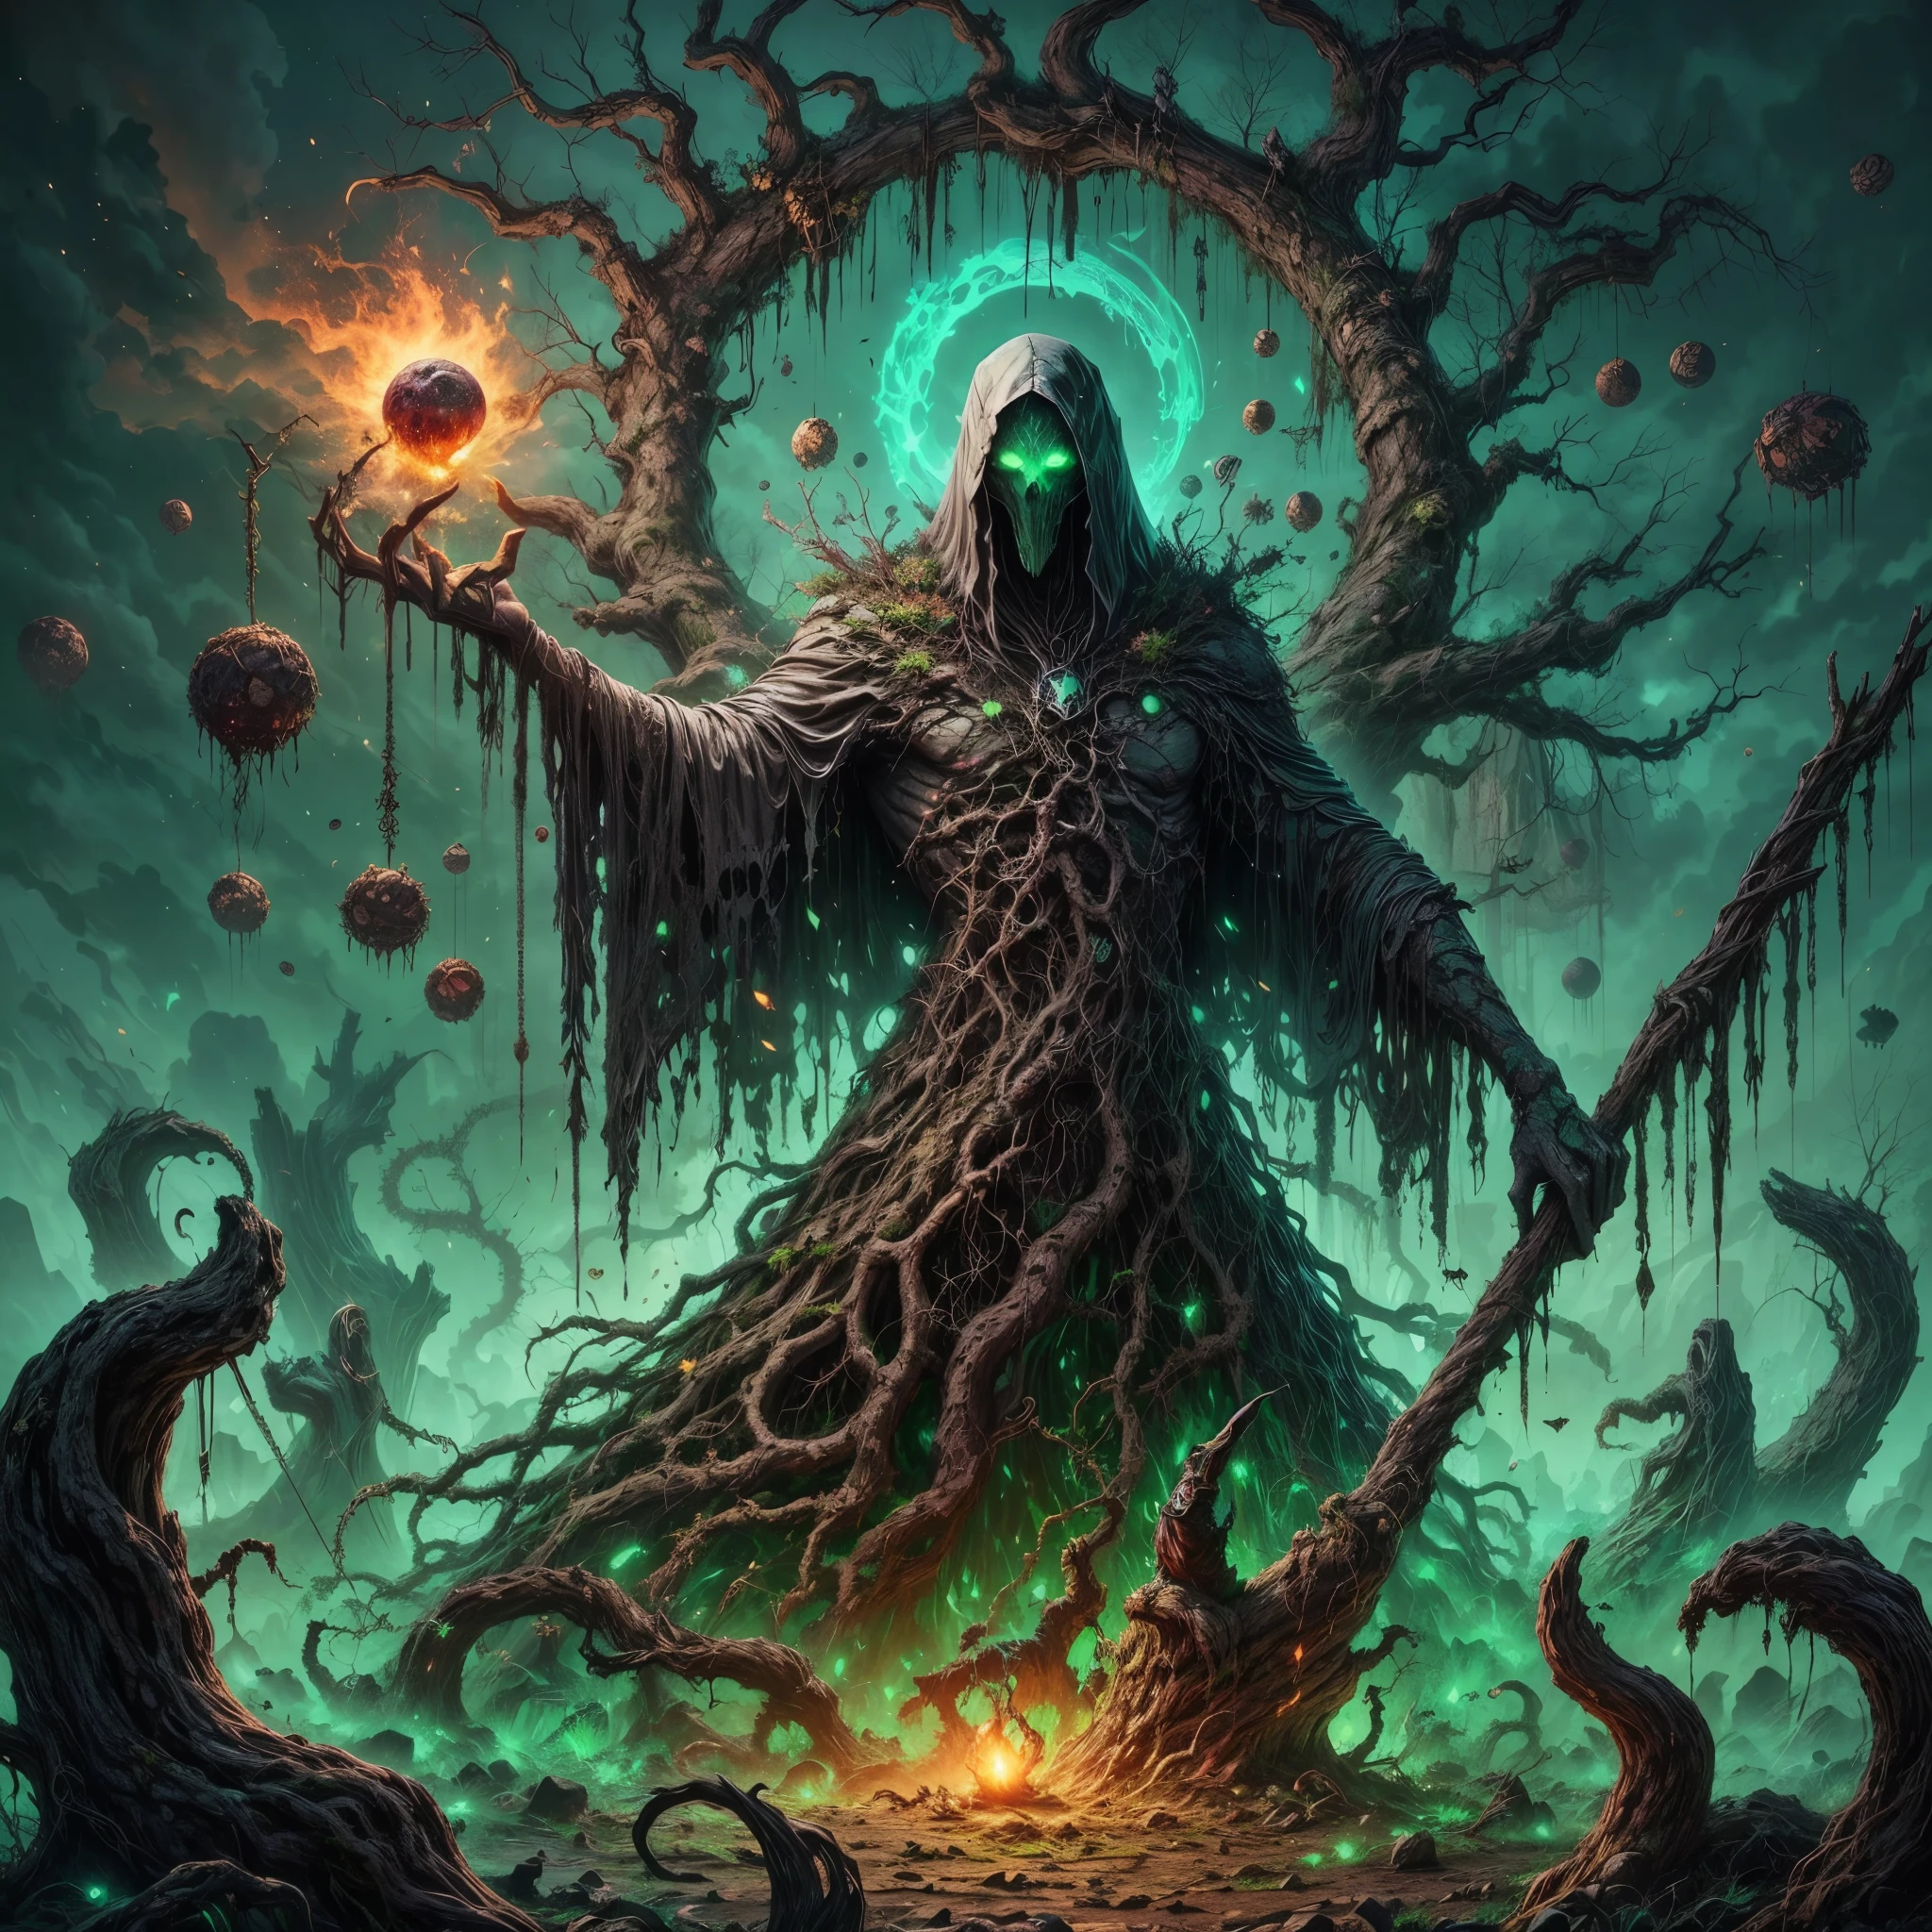 dark soul boss,elden Ring style,a corrupted tree man, an eldritch being inside a tree, 8 long thick root came from the back, corrupted wood hand and arm,  holding a runic dead tree branch as a spear, toxic fruit as bomb,thick trunk tentacles,glowing green eye,death green aura, open mouth, holding corrupted death fruit, astral ghost flying around, 